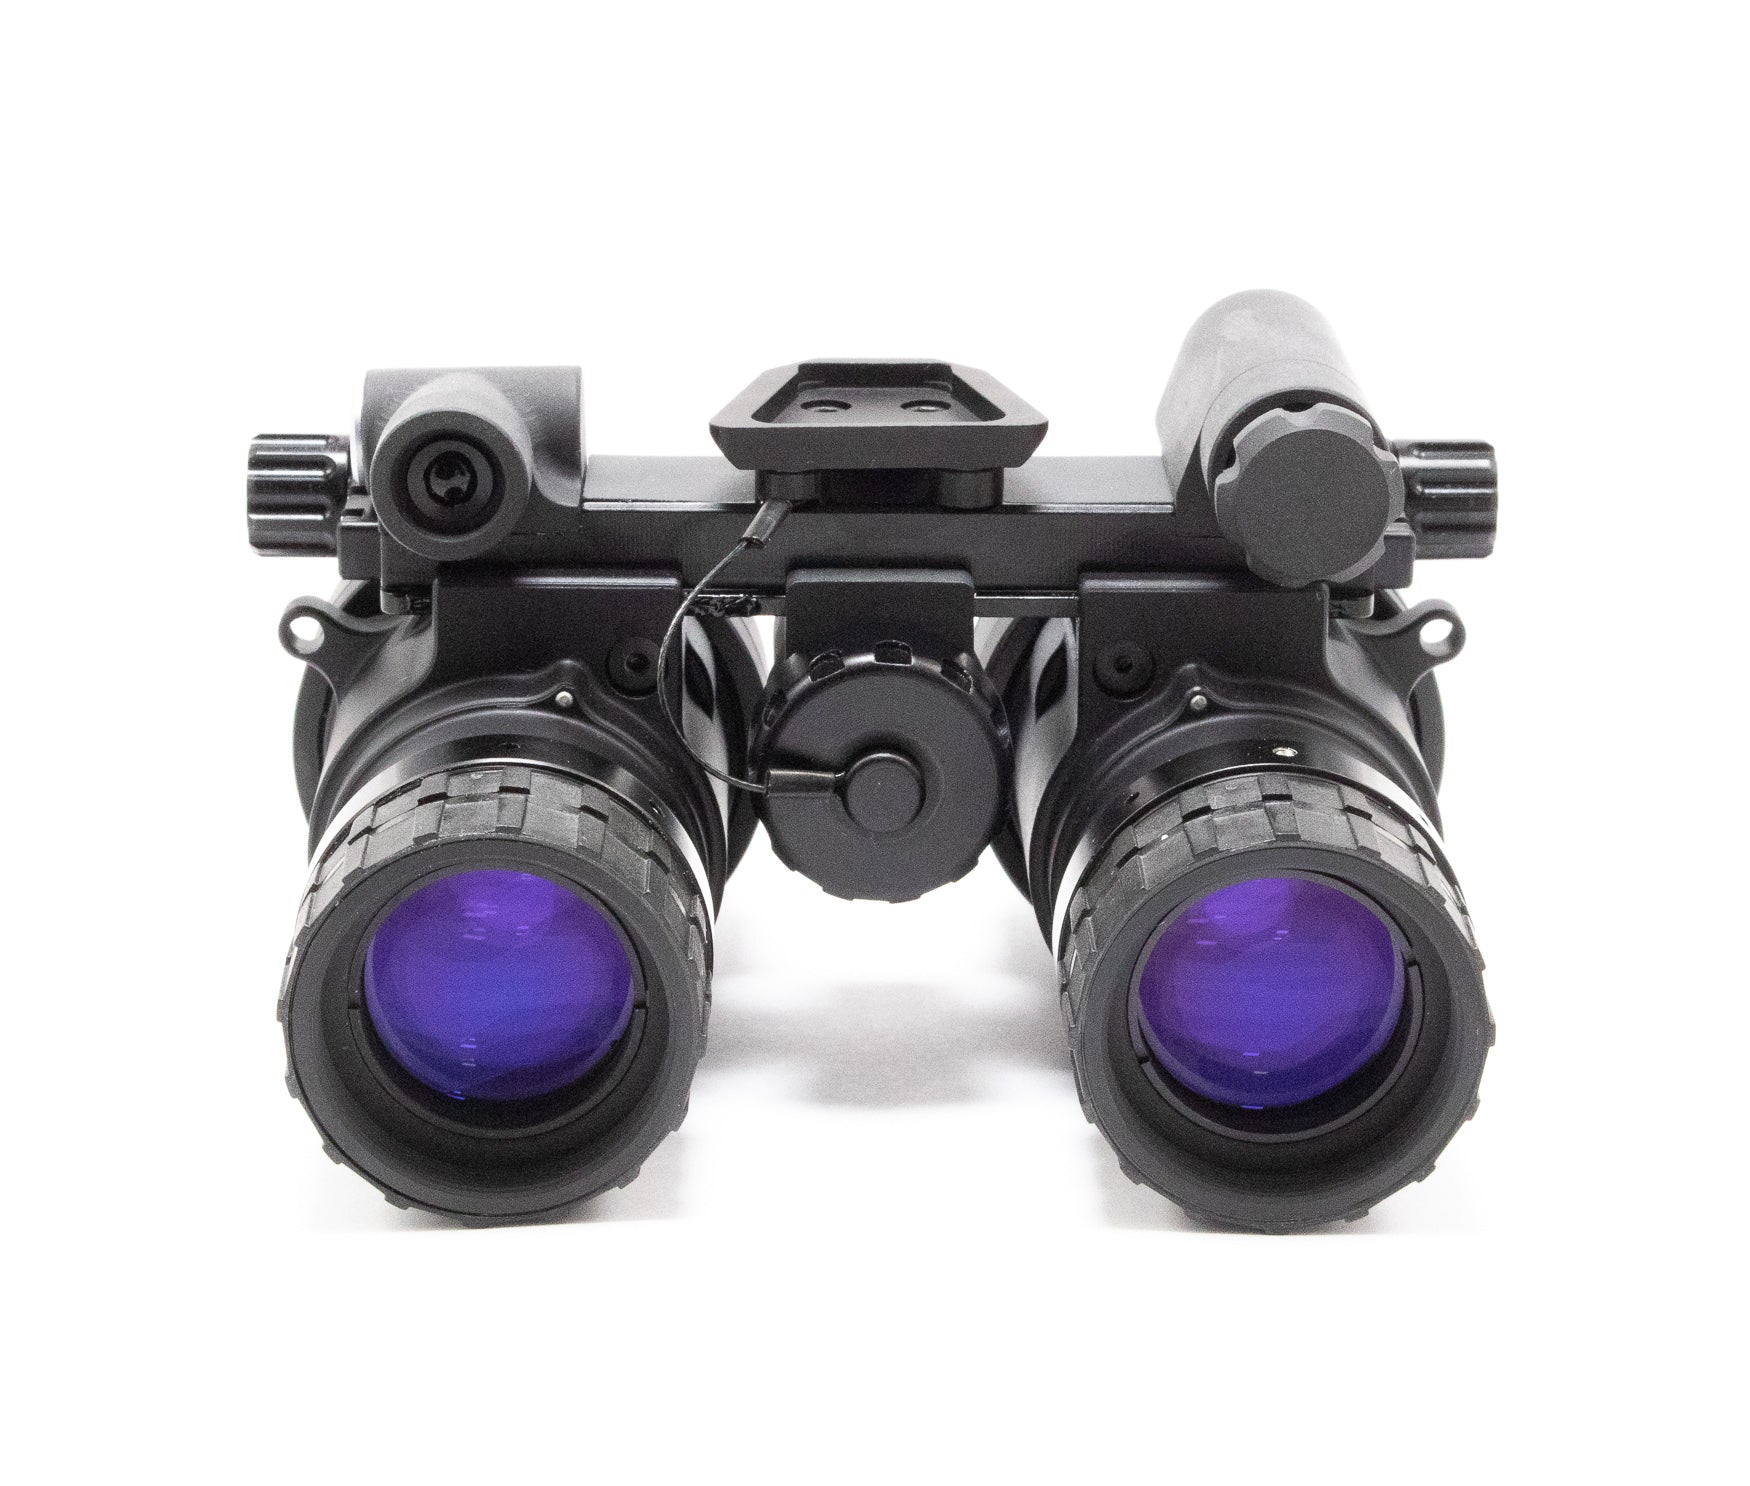 NightOps Tactical Ruggedized Night Vision Goggle (RNVG) - Pew Pew Solutions